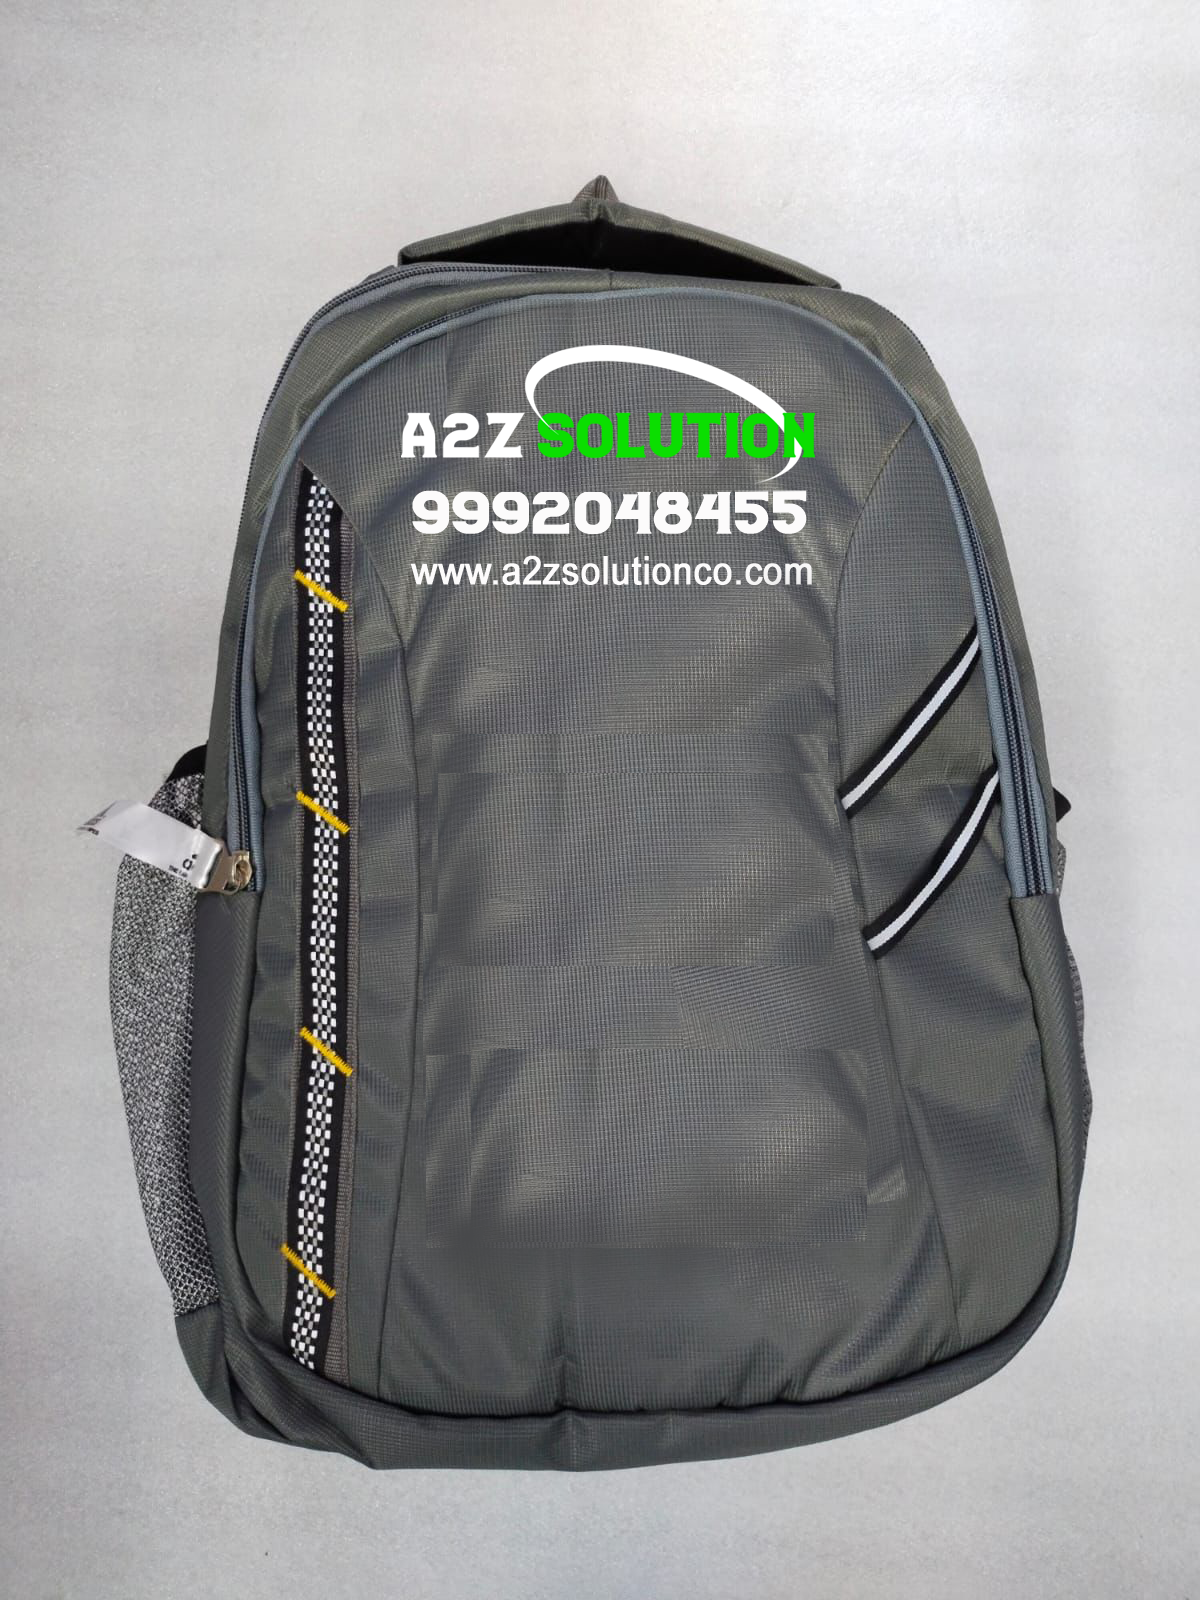 A2Z Solution Membership Joining Bag